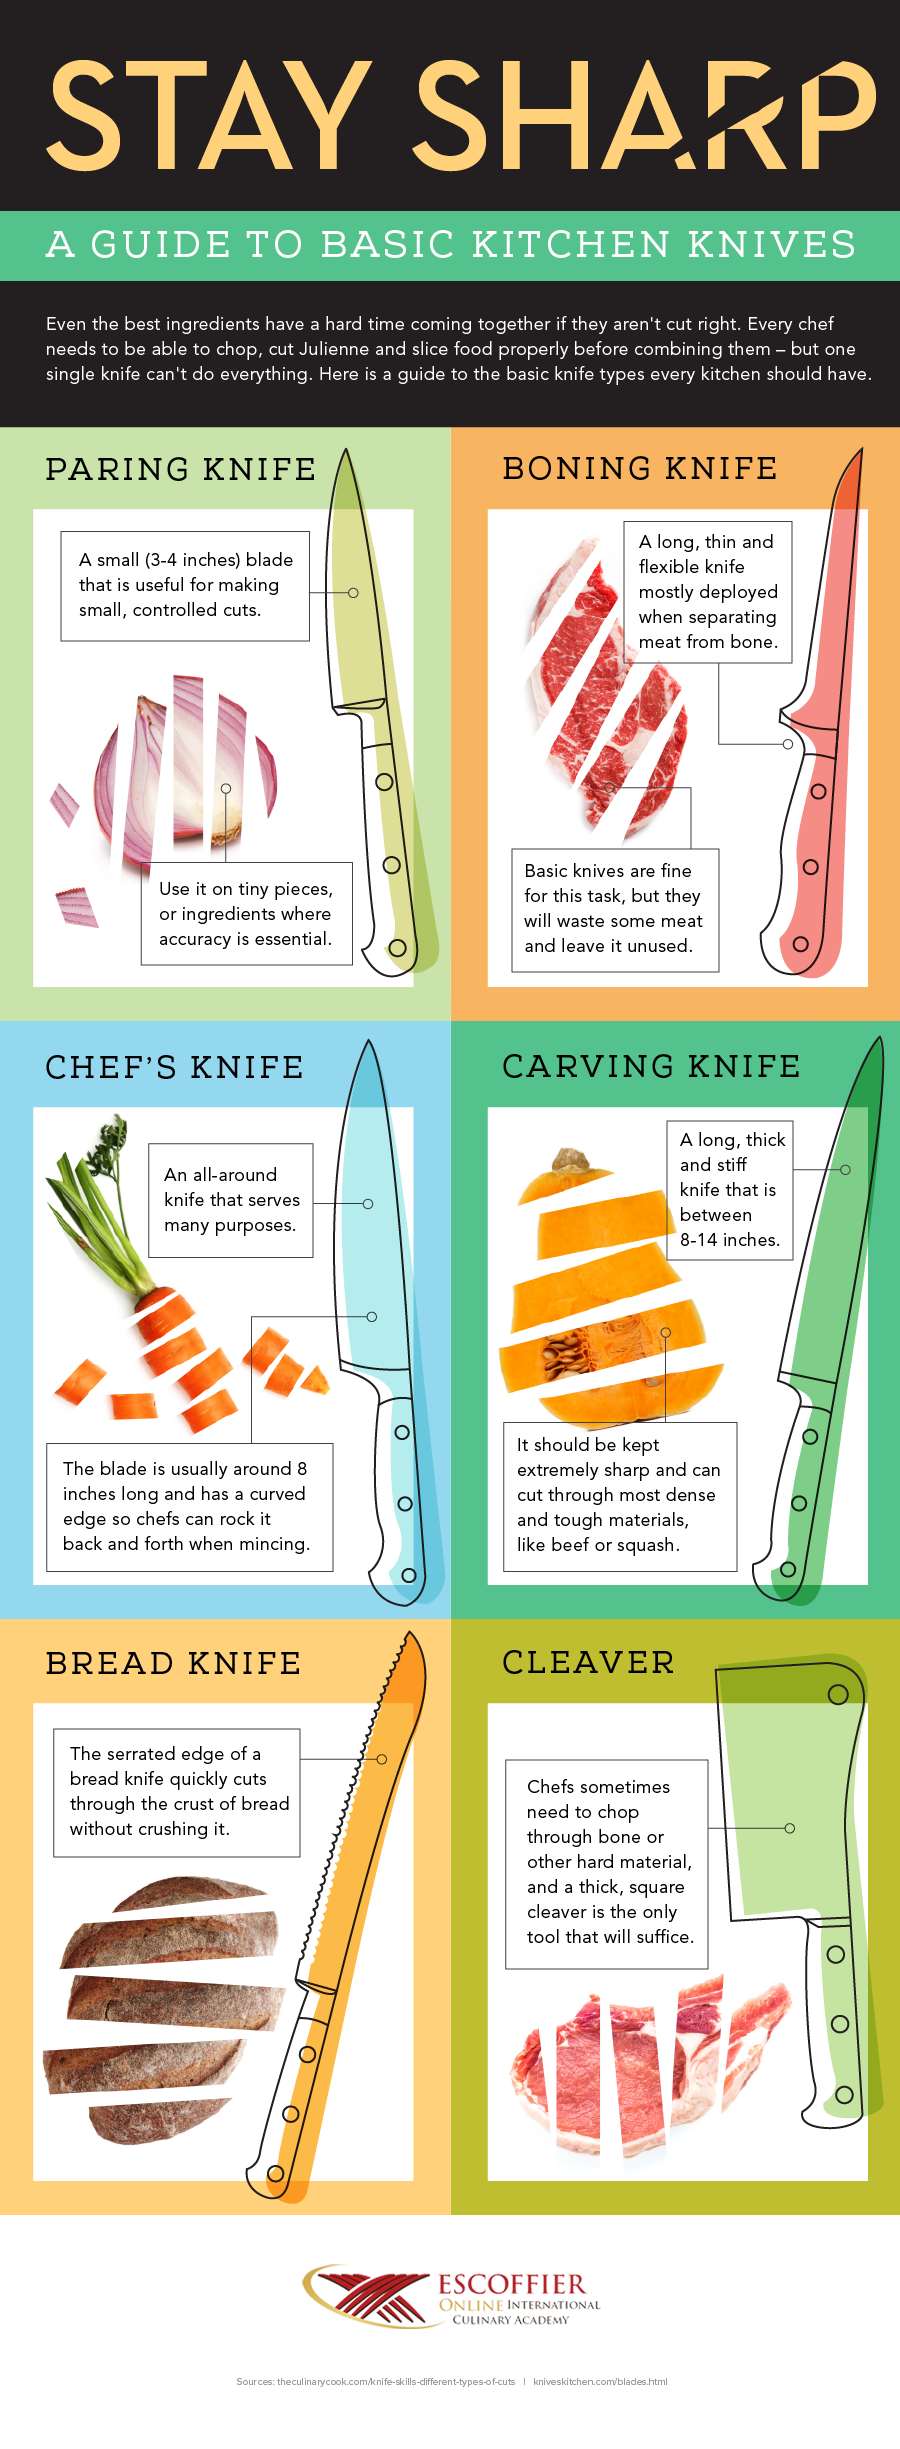 4-knife-tips-for-better-cuts-in-the-kitchen-escoffier-online